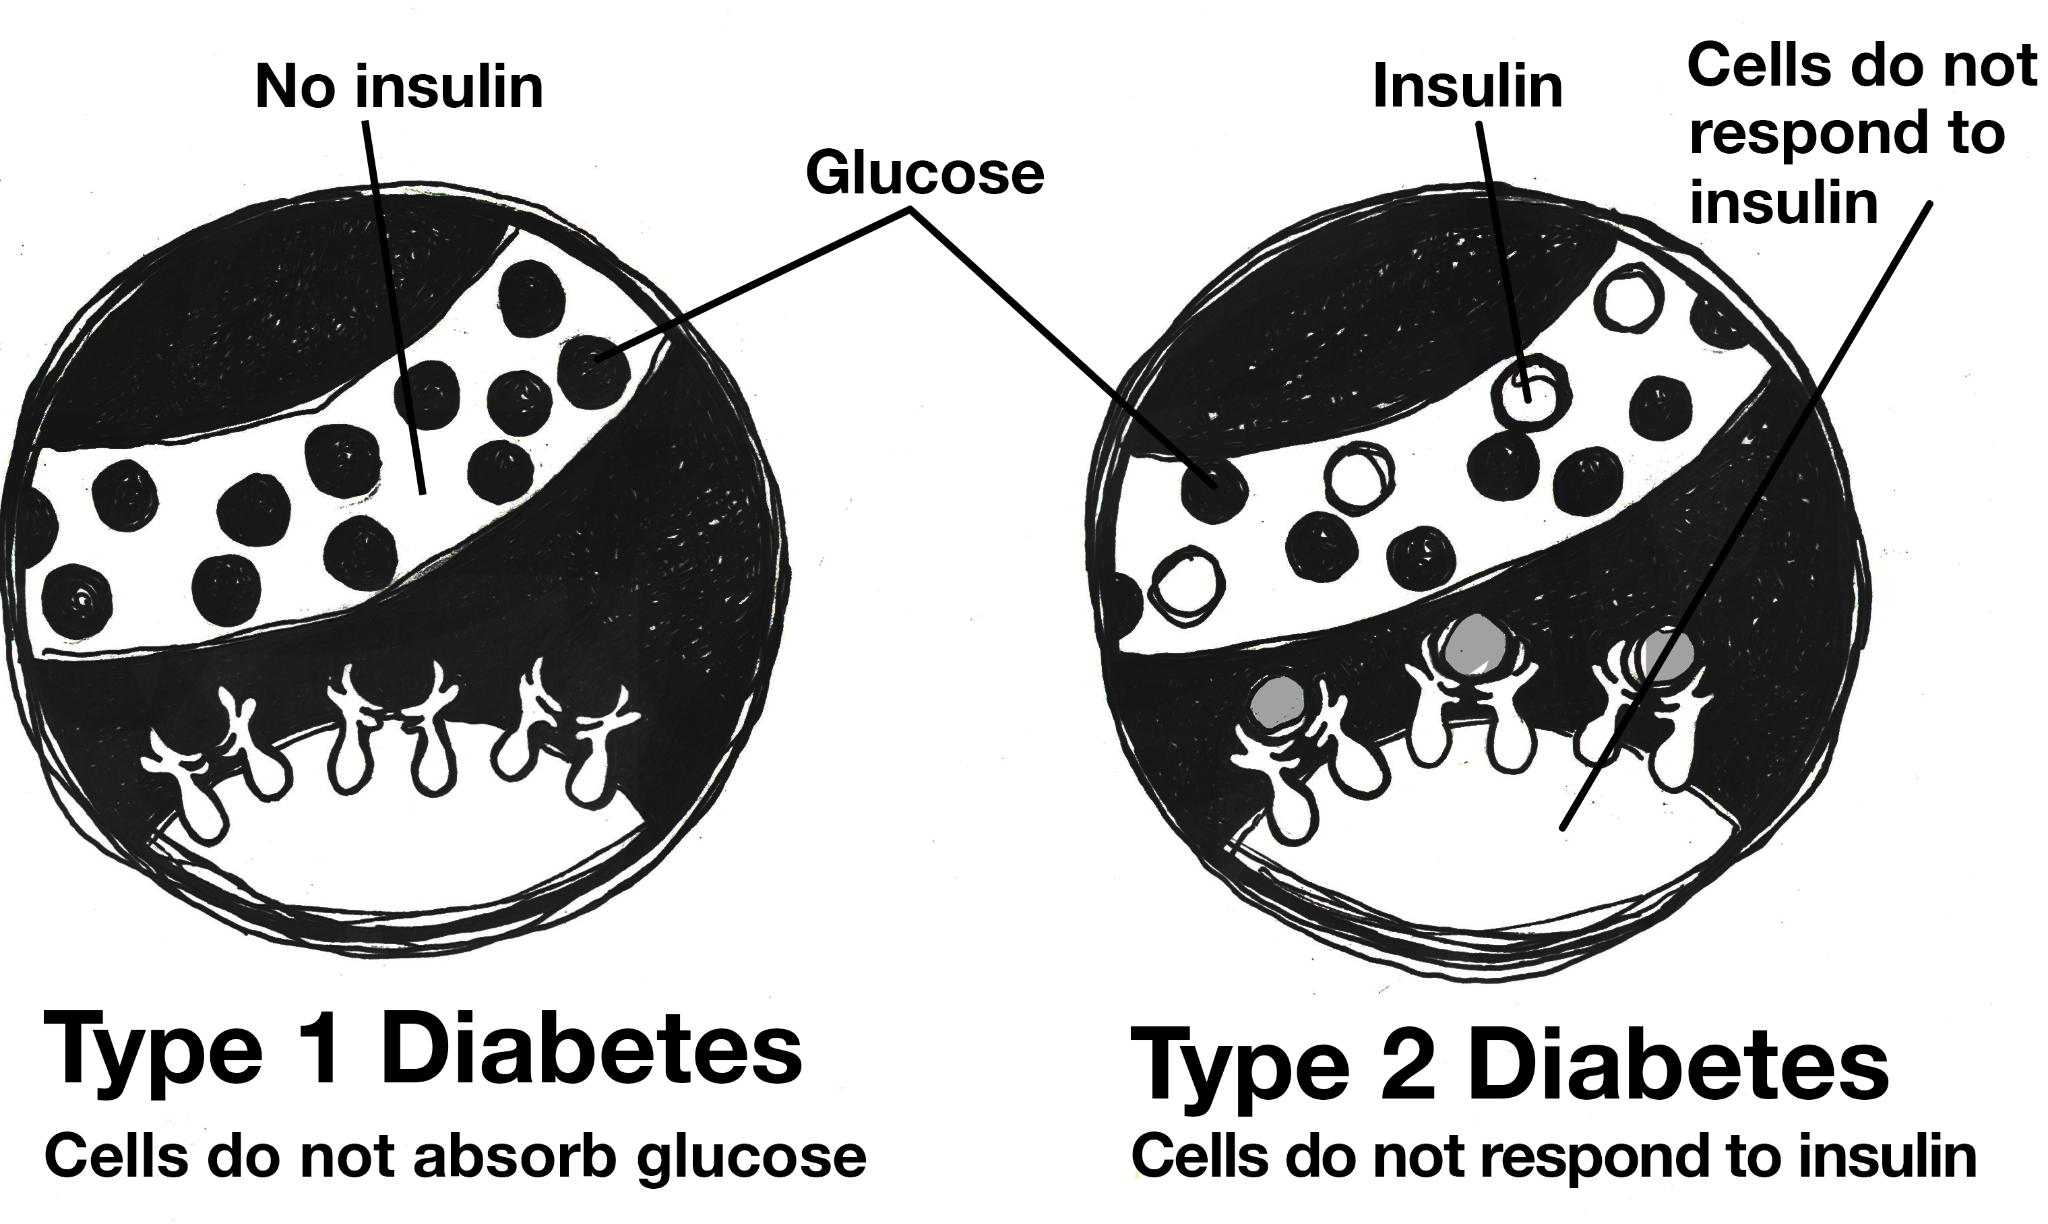 Type 1 cells and Type 2 cells and their response to insulin.